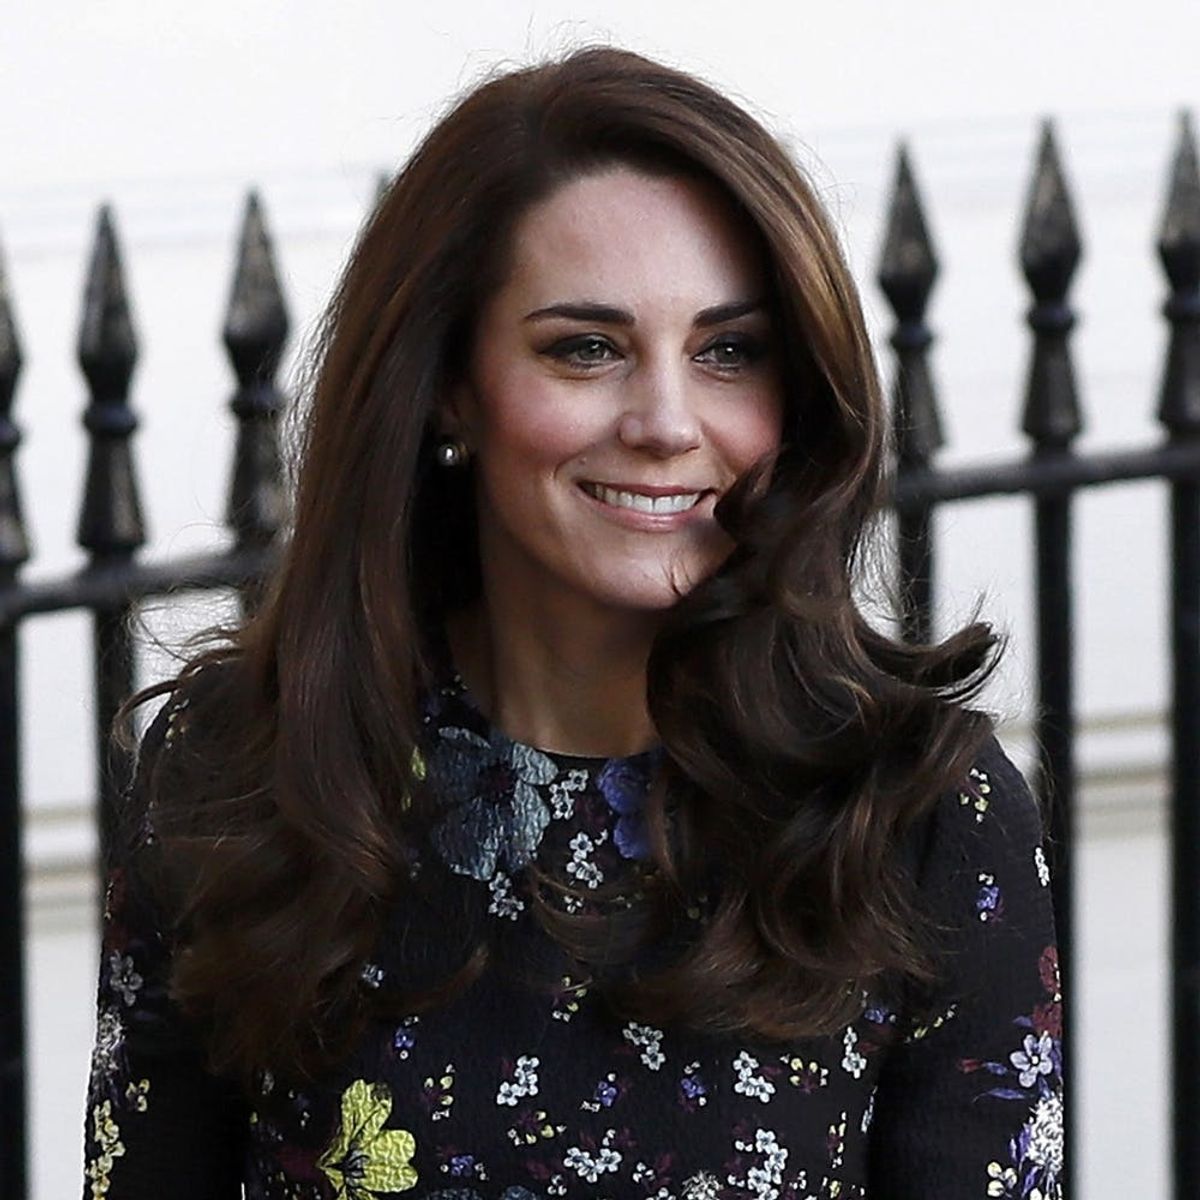 Kate Middleton Doesn’t Get Flat Winter Hair Like the Rest of Us